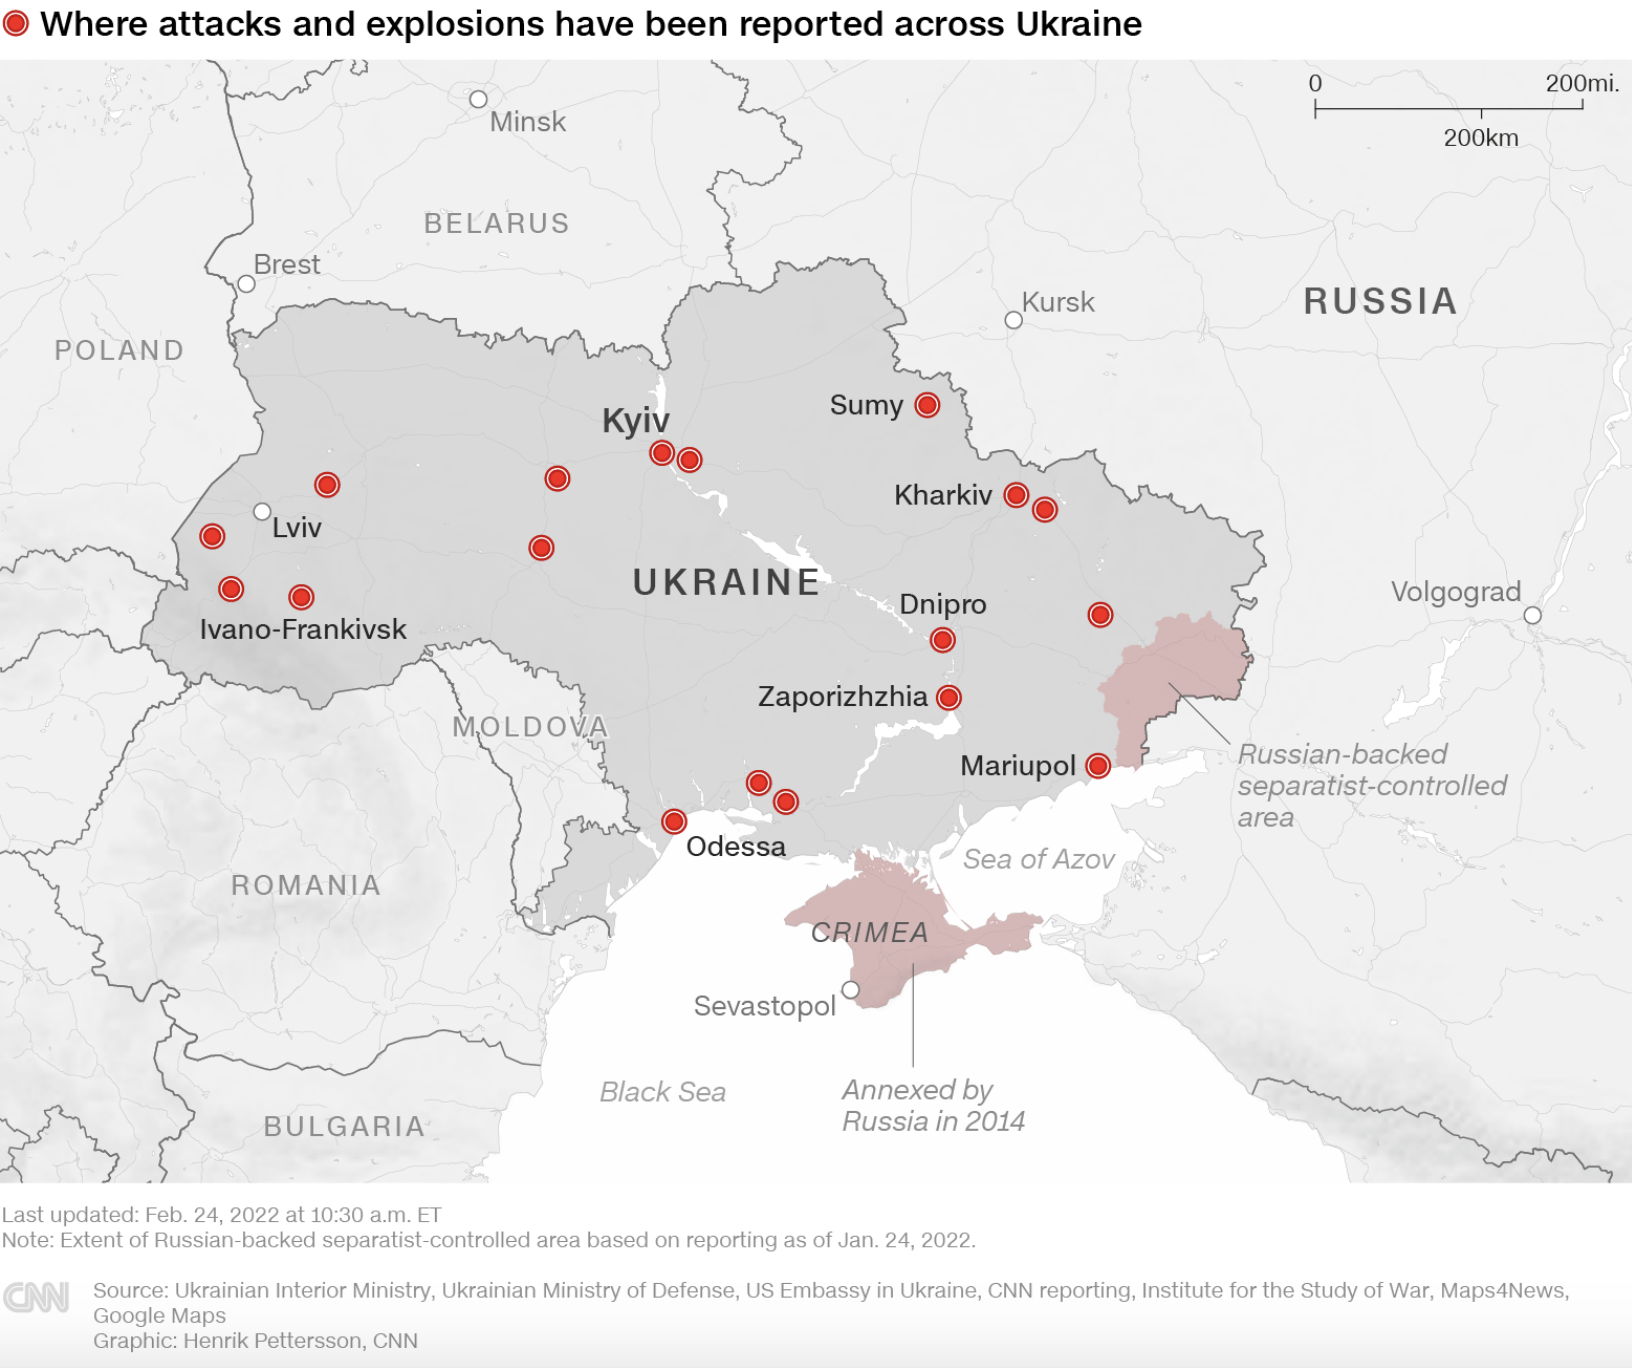 Ukraine locations where attacks and explosions have been reported